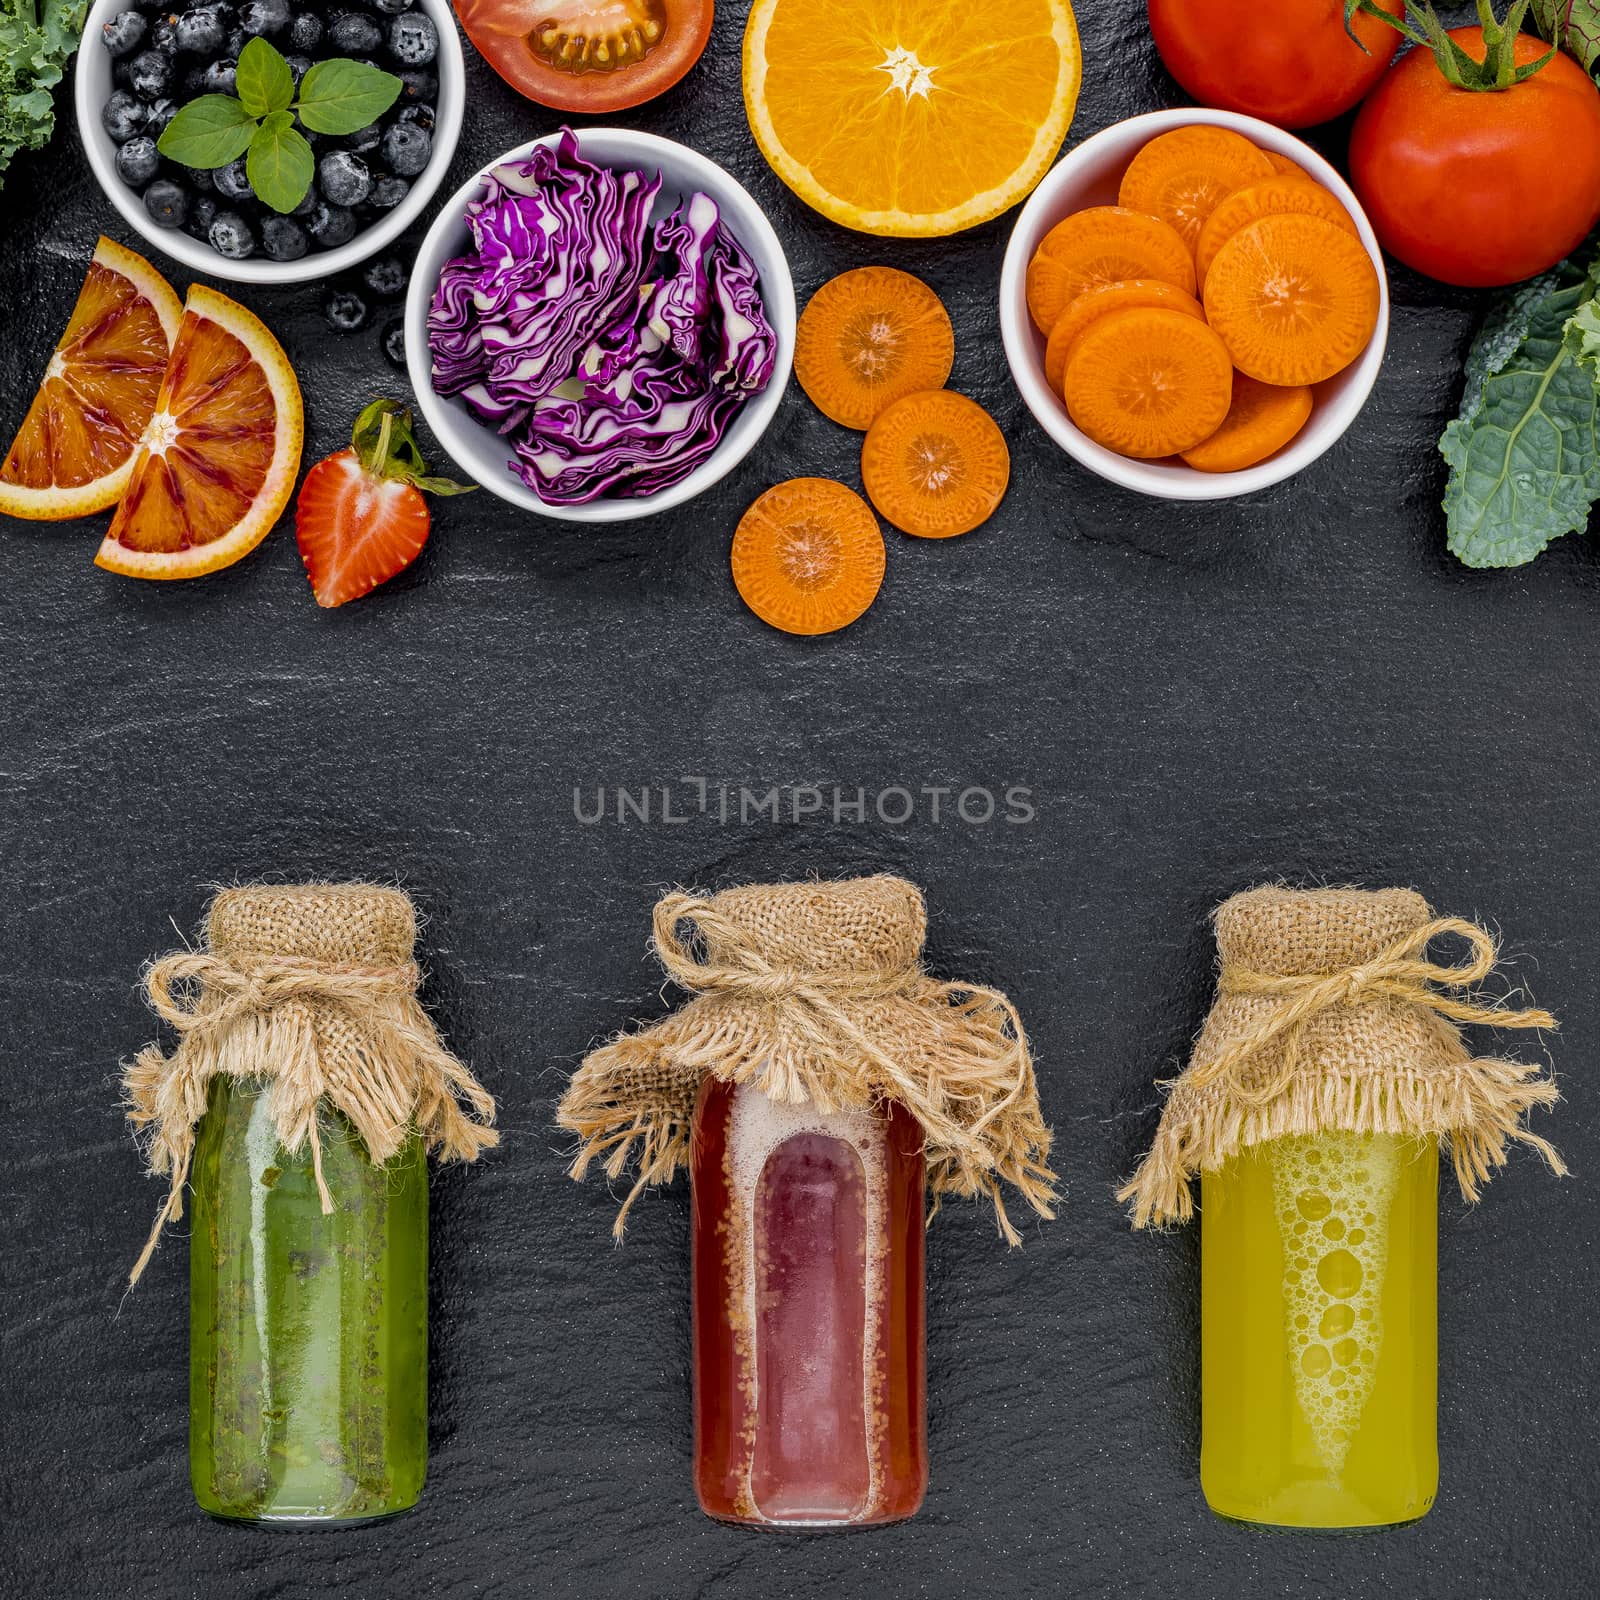 Colourful healthy smoothies and juices in bottles with fresh tro by kerdkanno